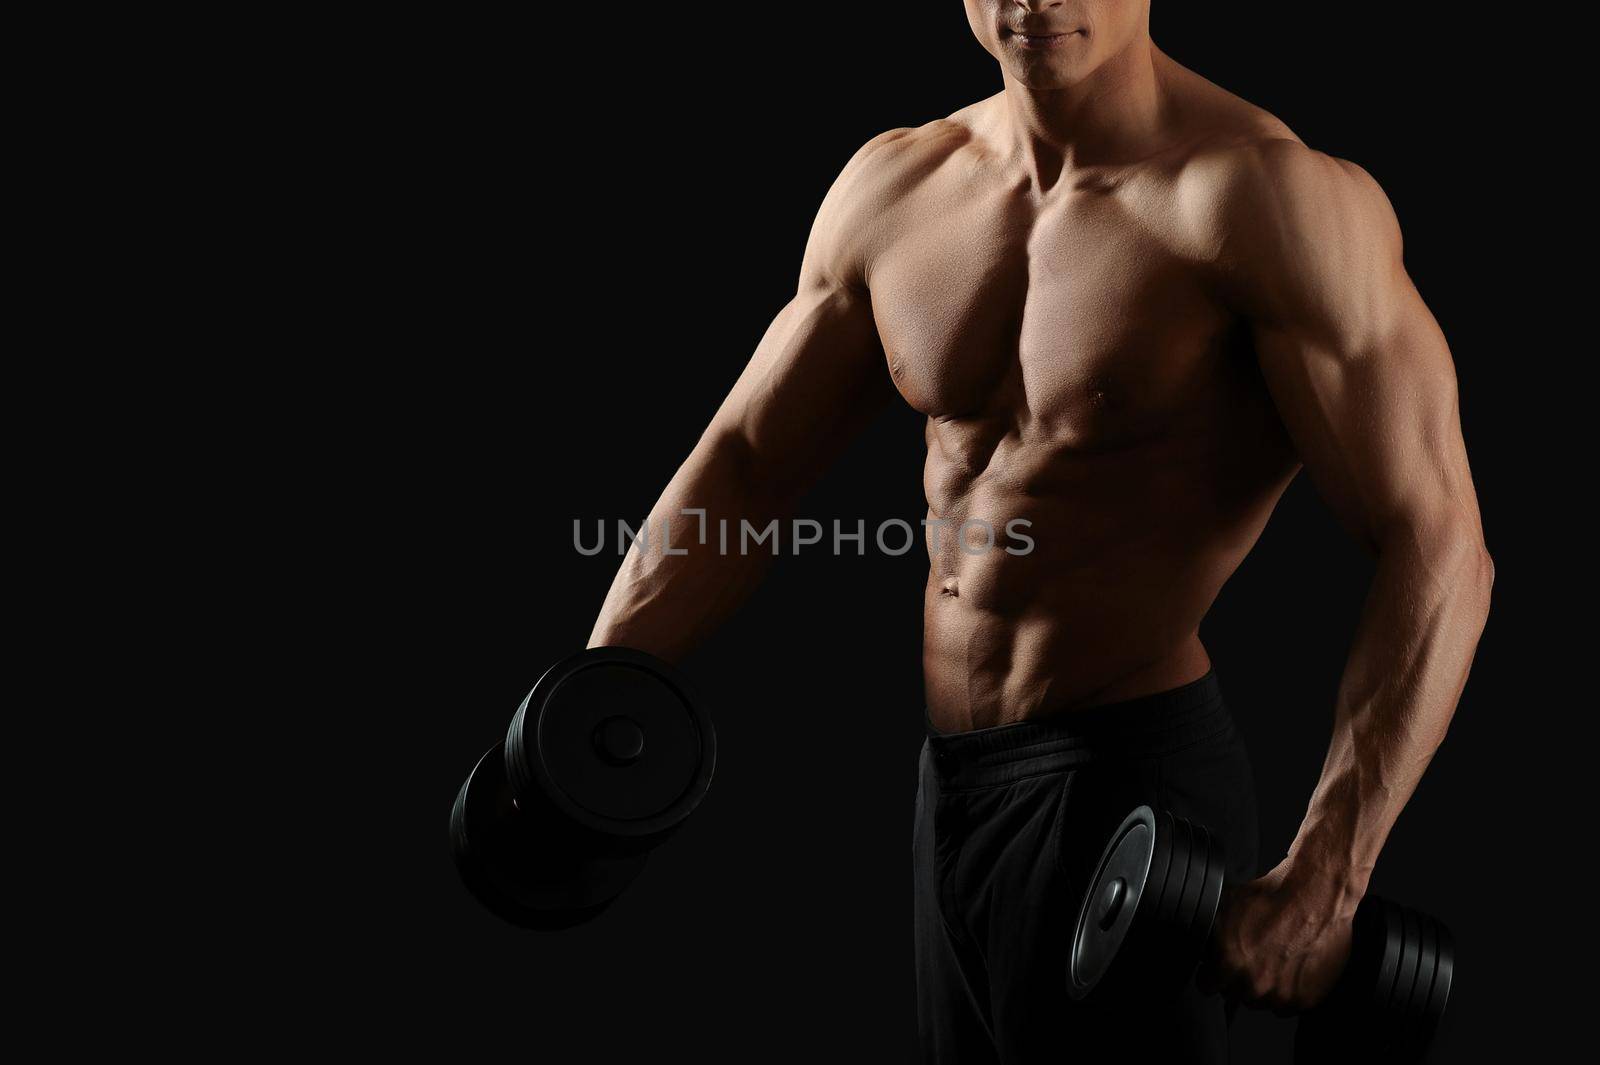 Fitness routine. Cropped horizontal shot of a young fit bodybuilder exercising with dumbbells posing shirtless on black background